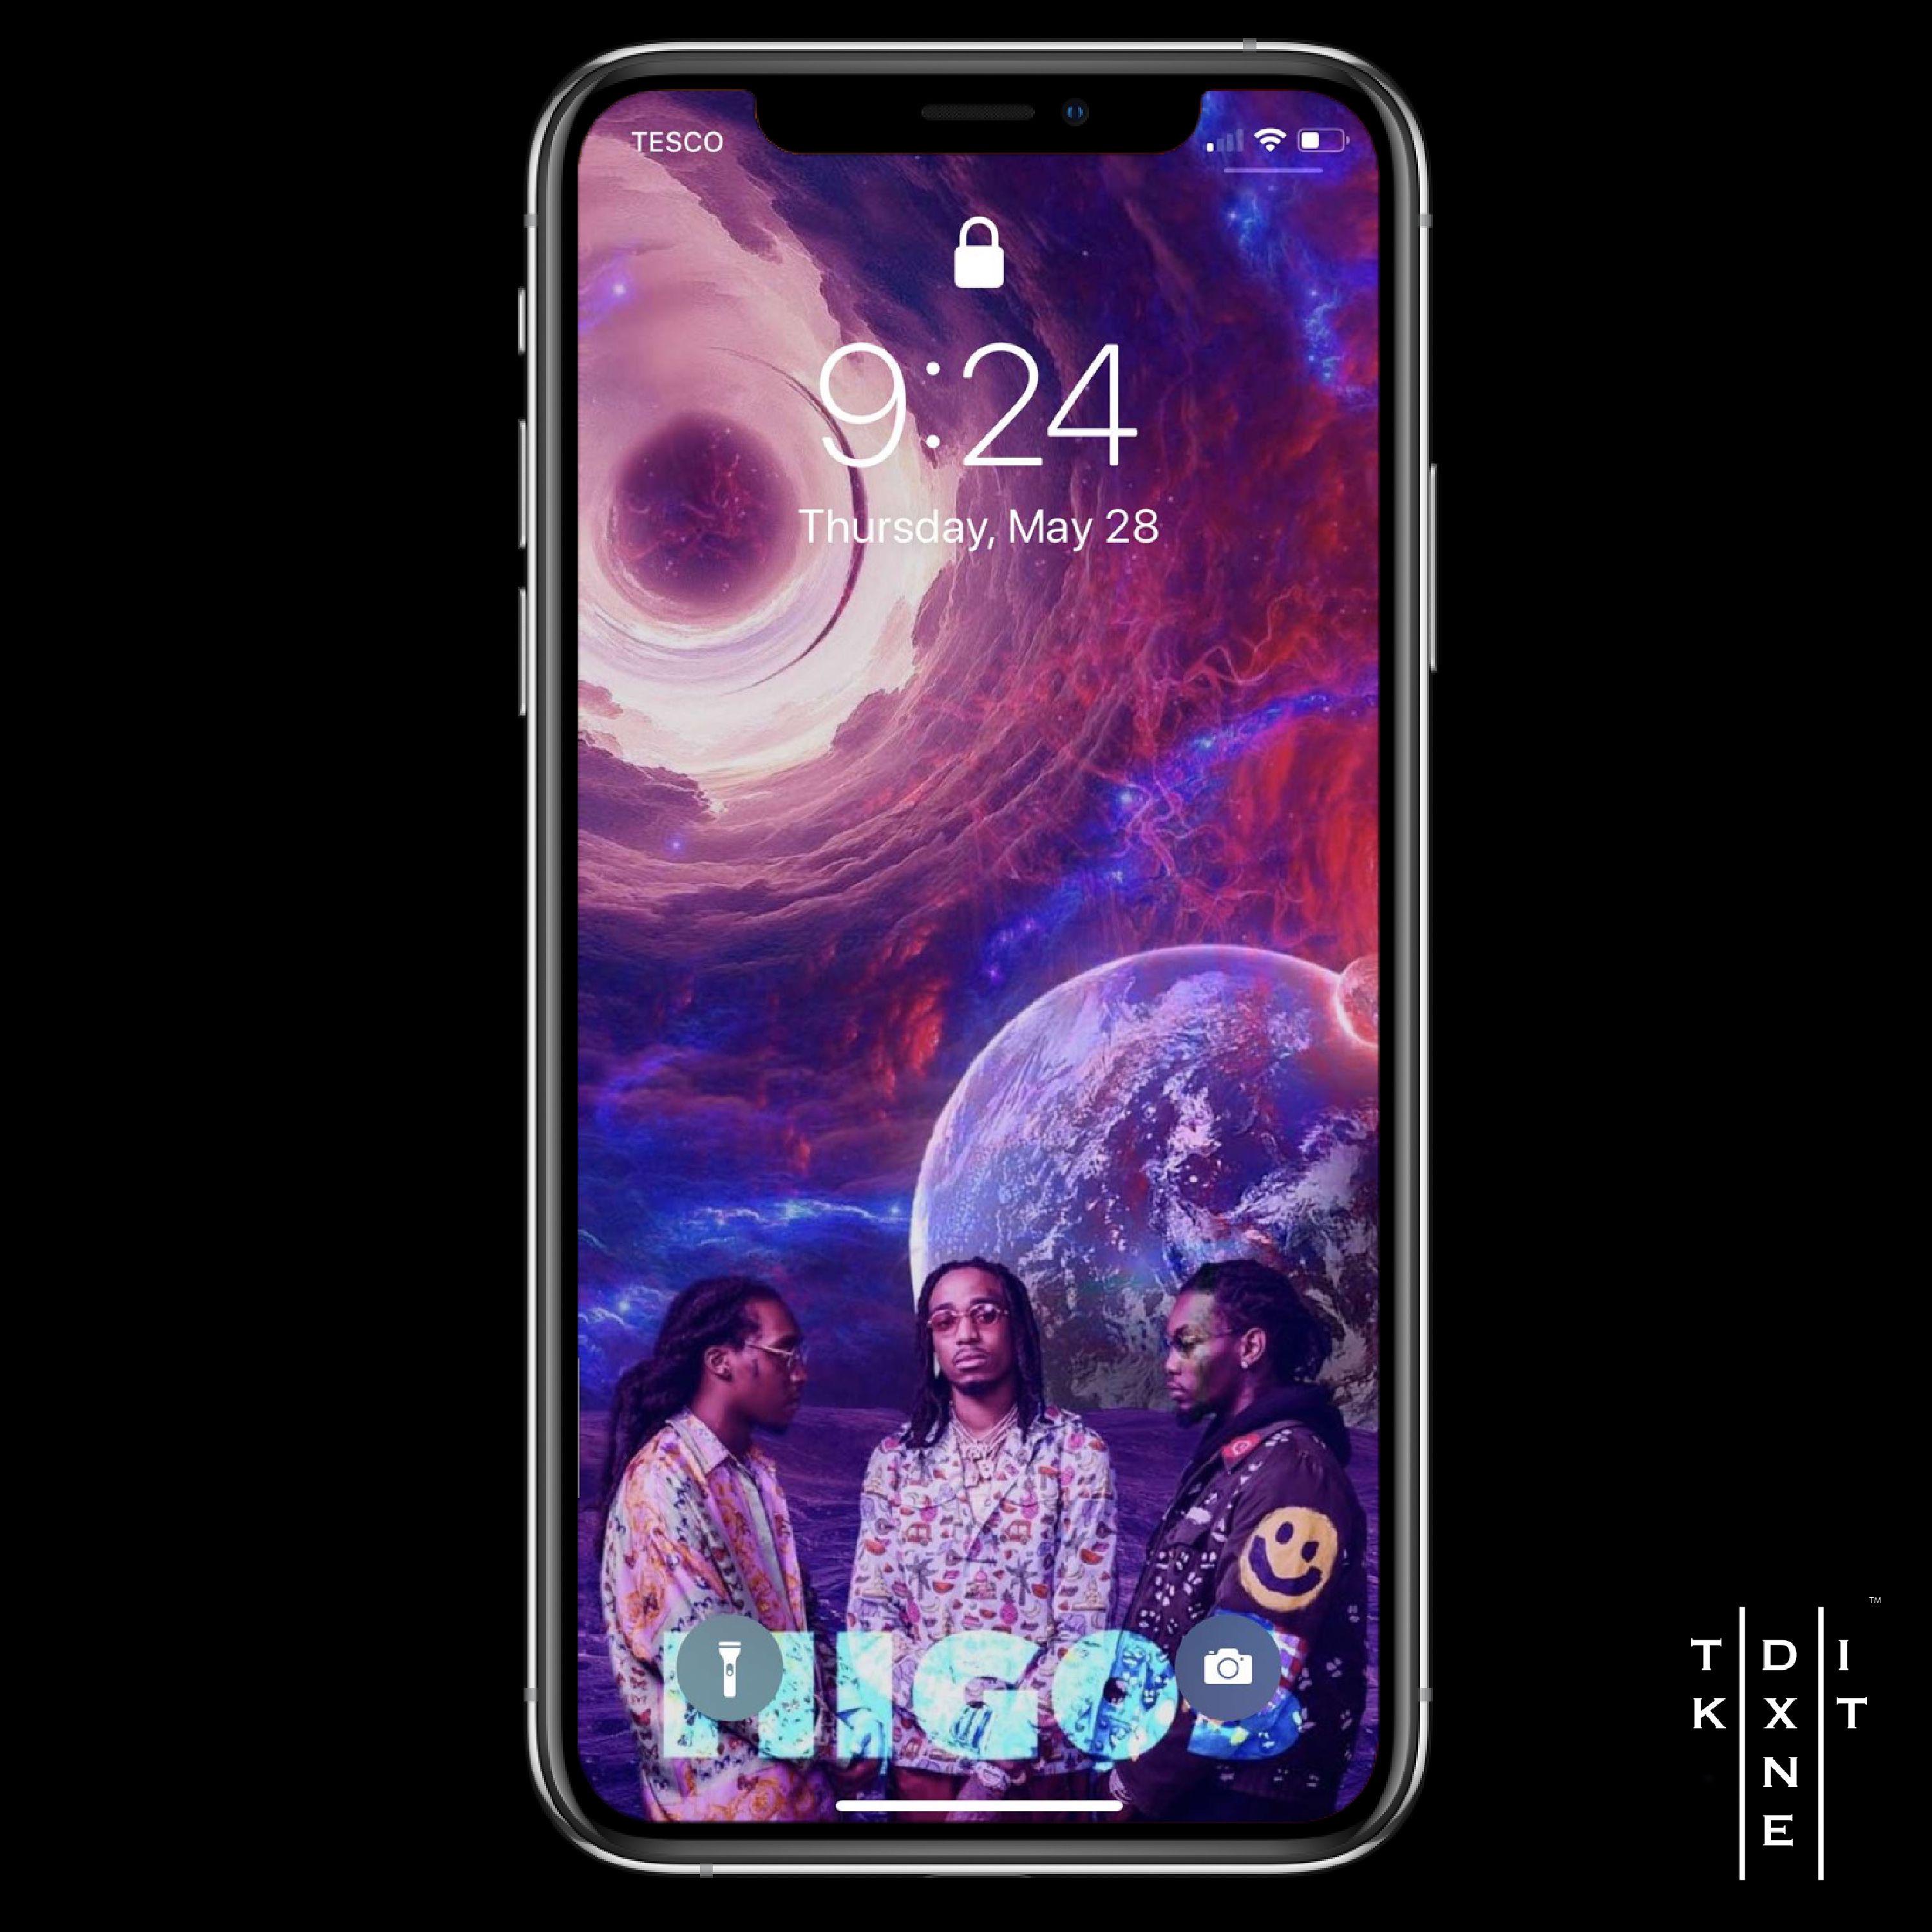 Migos Iphone Wallpapers